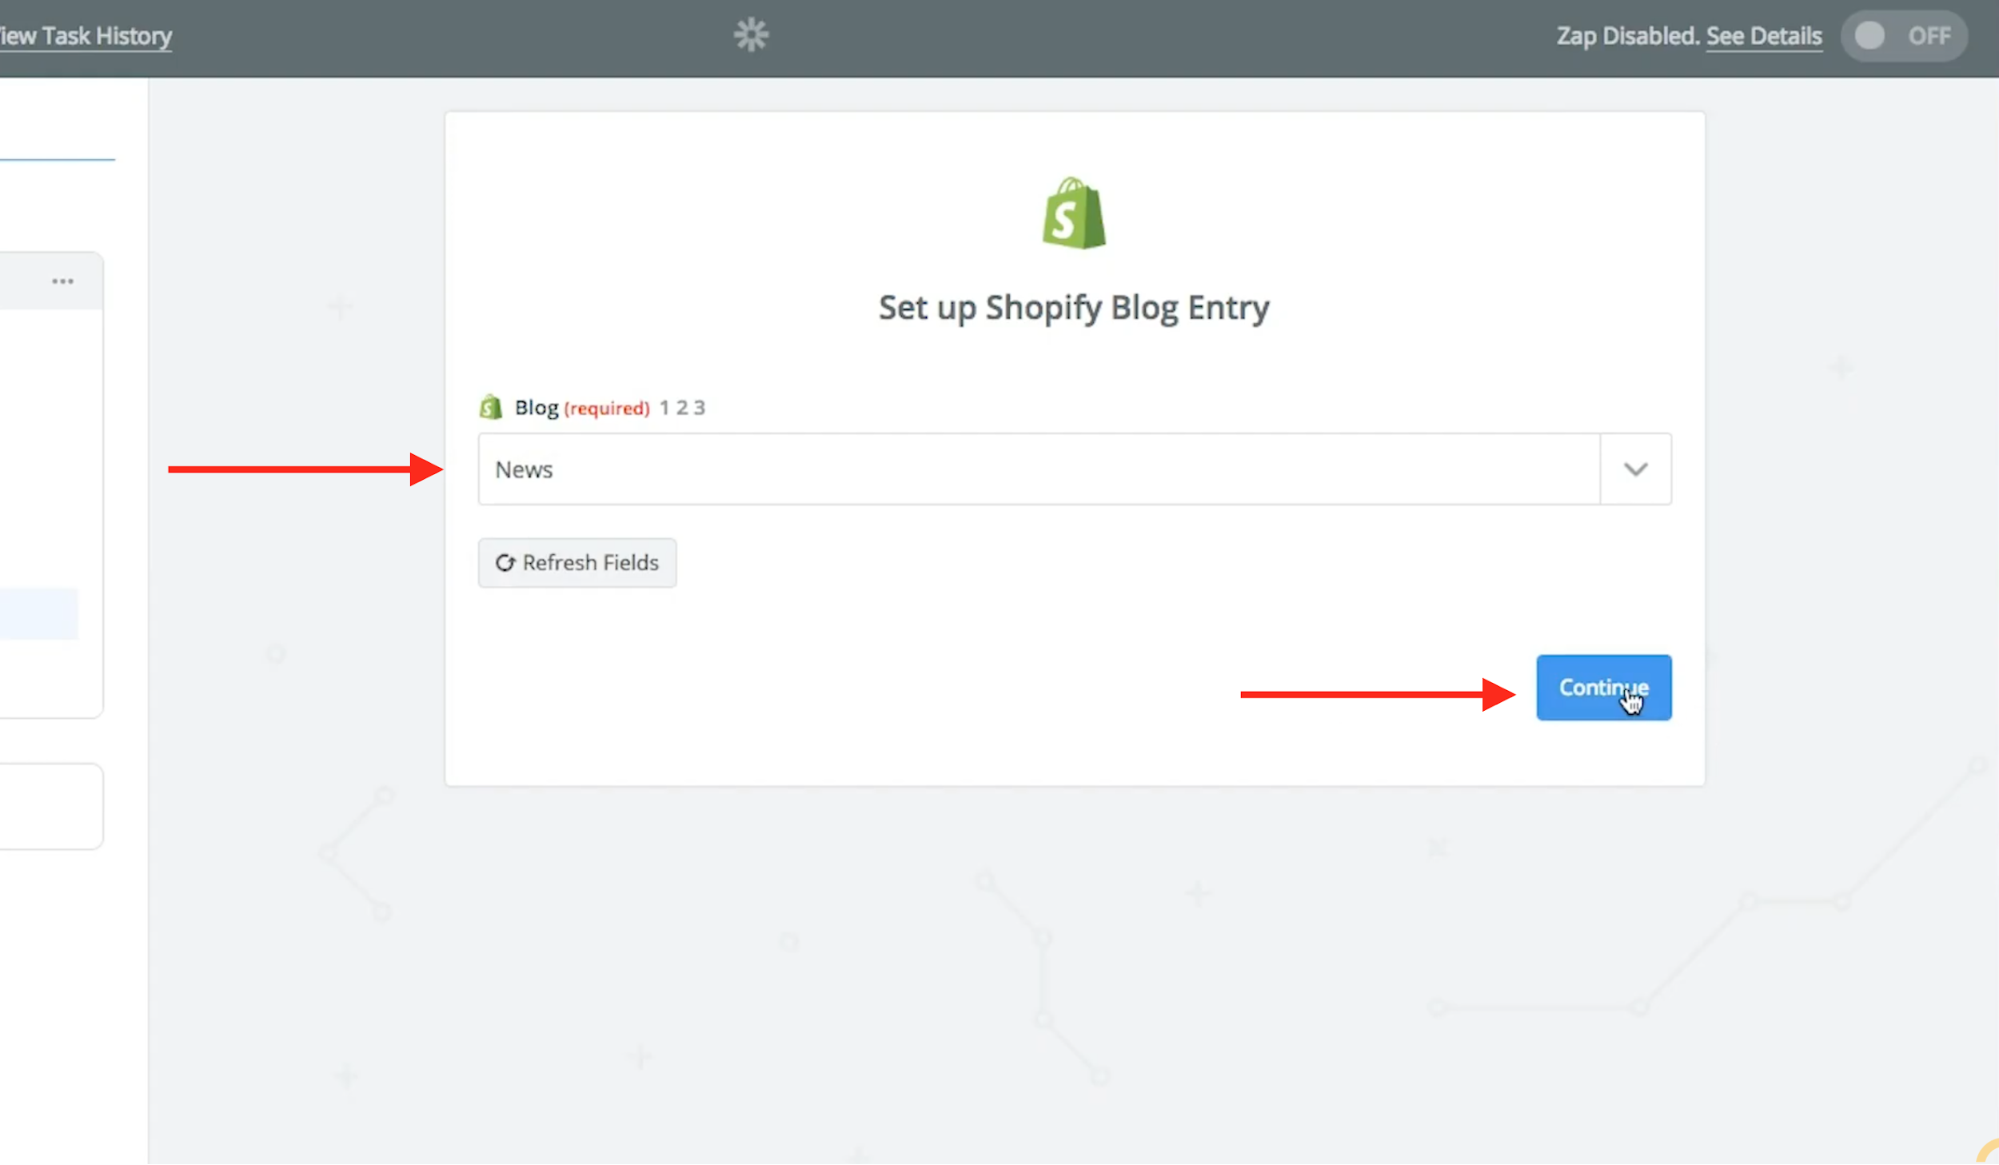 User selects the Shopify blog they want to use